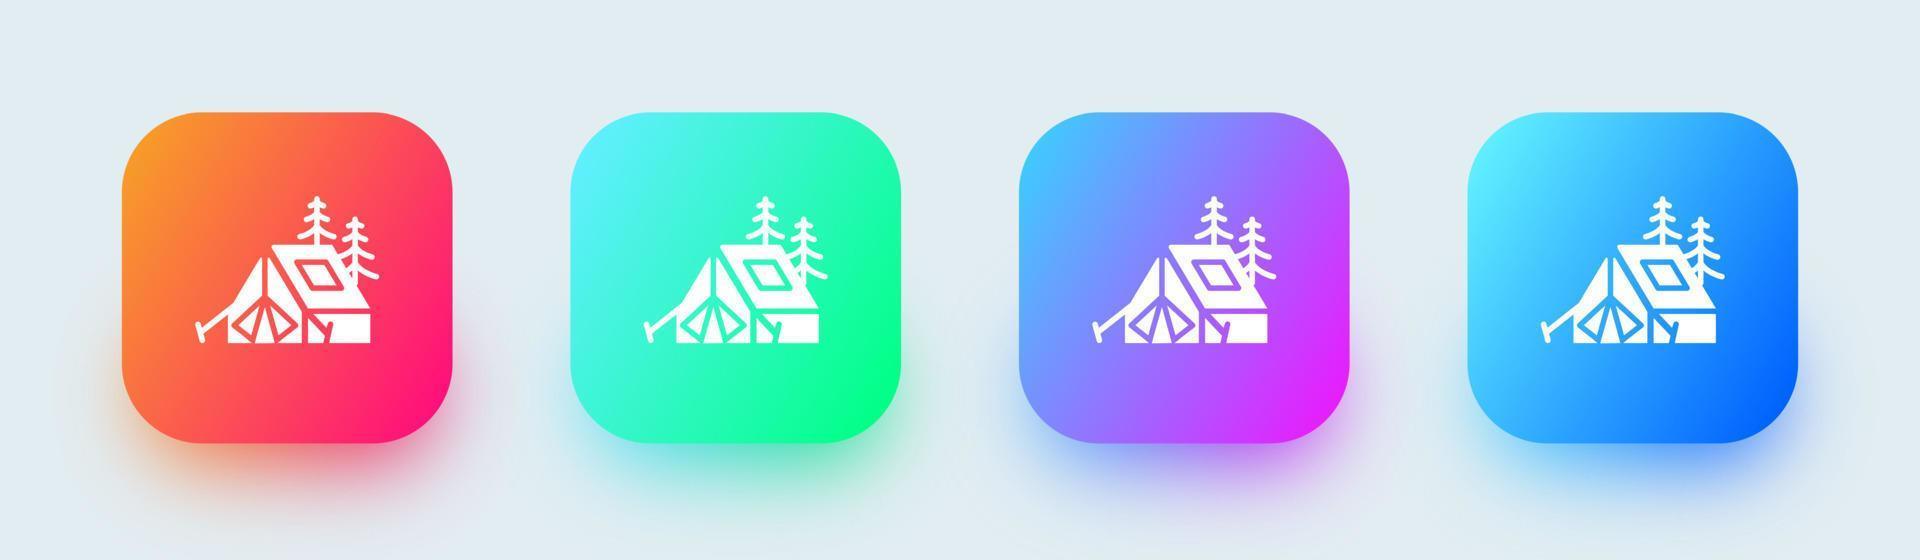 Tent solid icon in square gradient colors. Camping signs vector illustration.